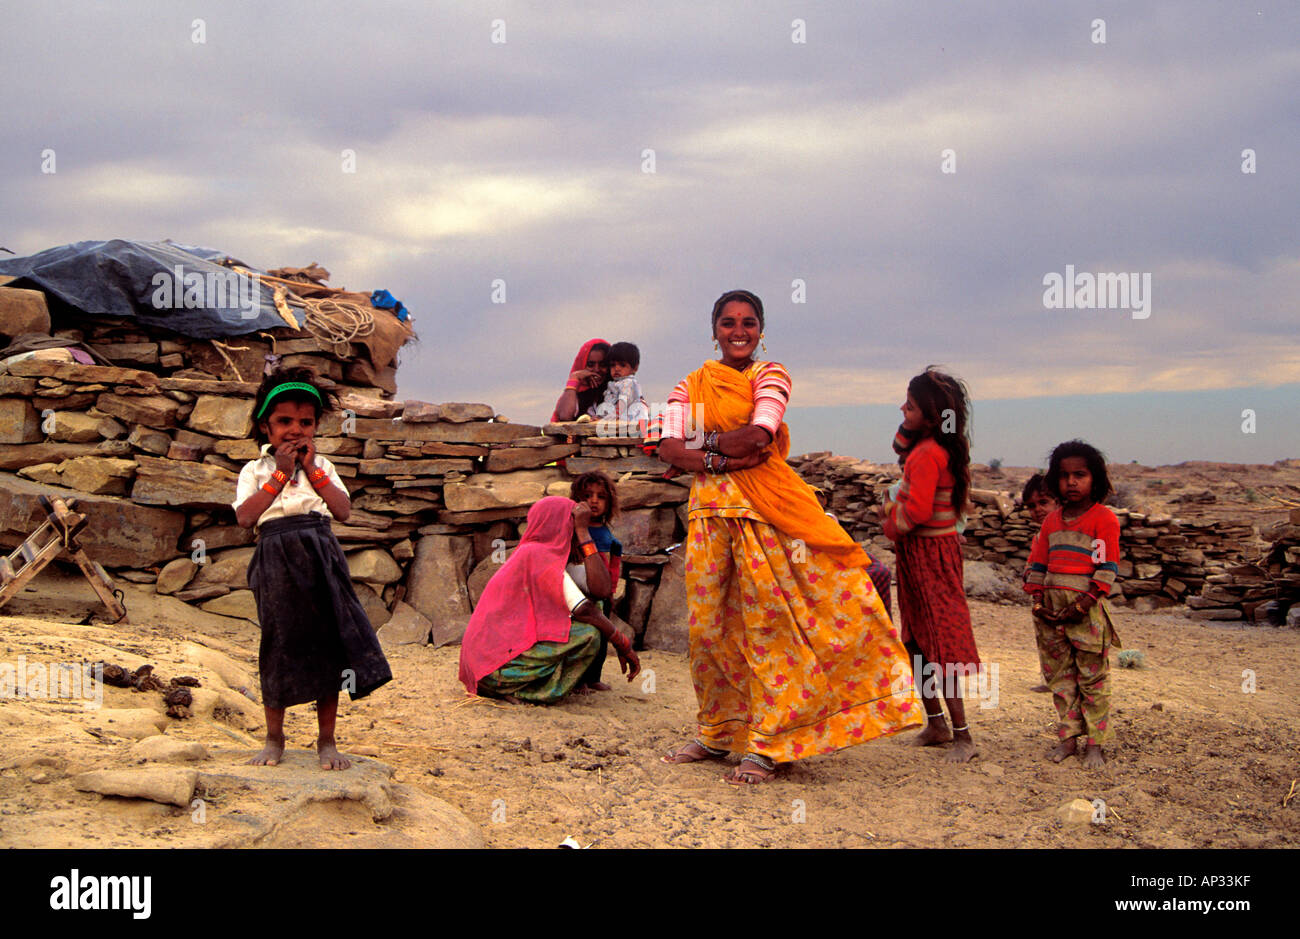 Nomadic Indian family gathered outside their makeshift home in the desert, Jaisalmer, Rajasthan, India Stock Photo